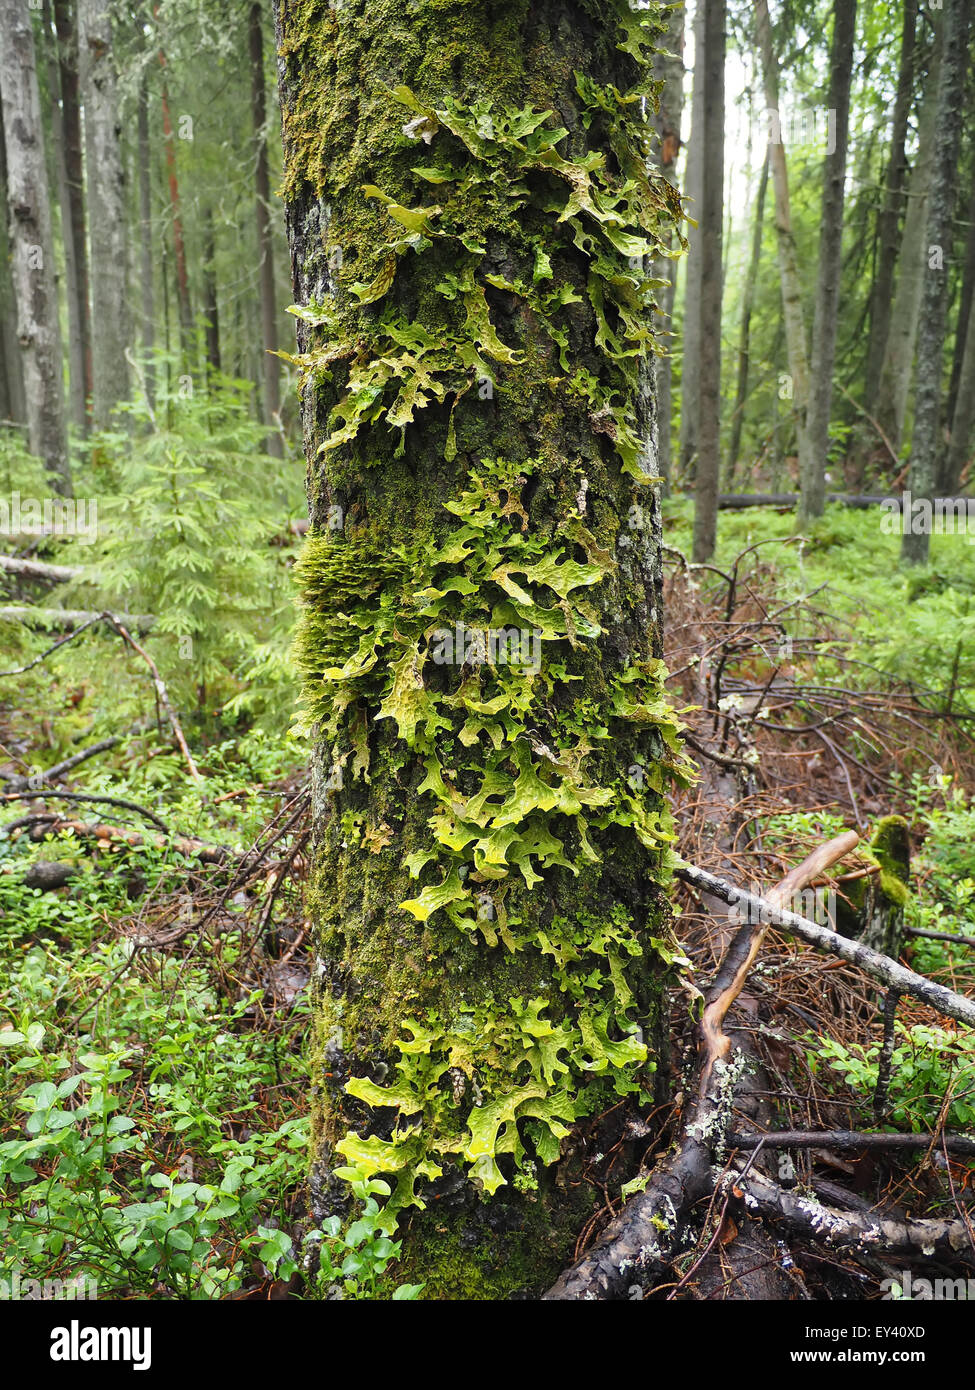 Lobaria pulmonaria on tree in forest Stock Photo